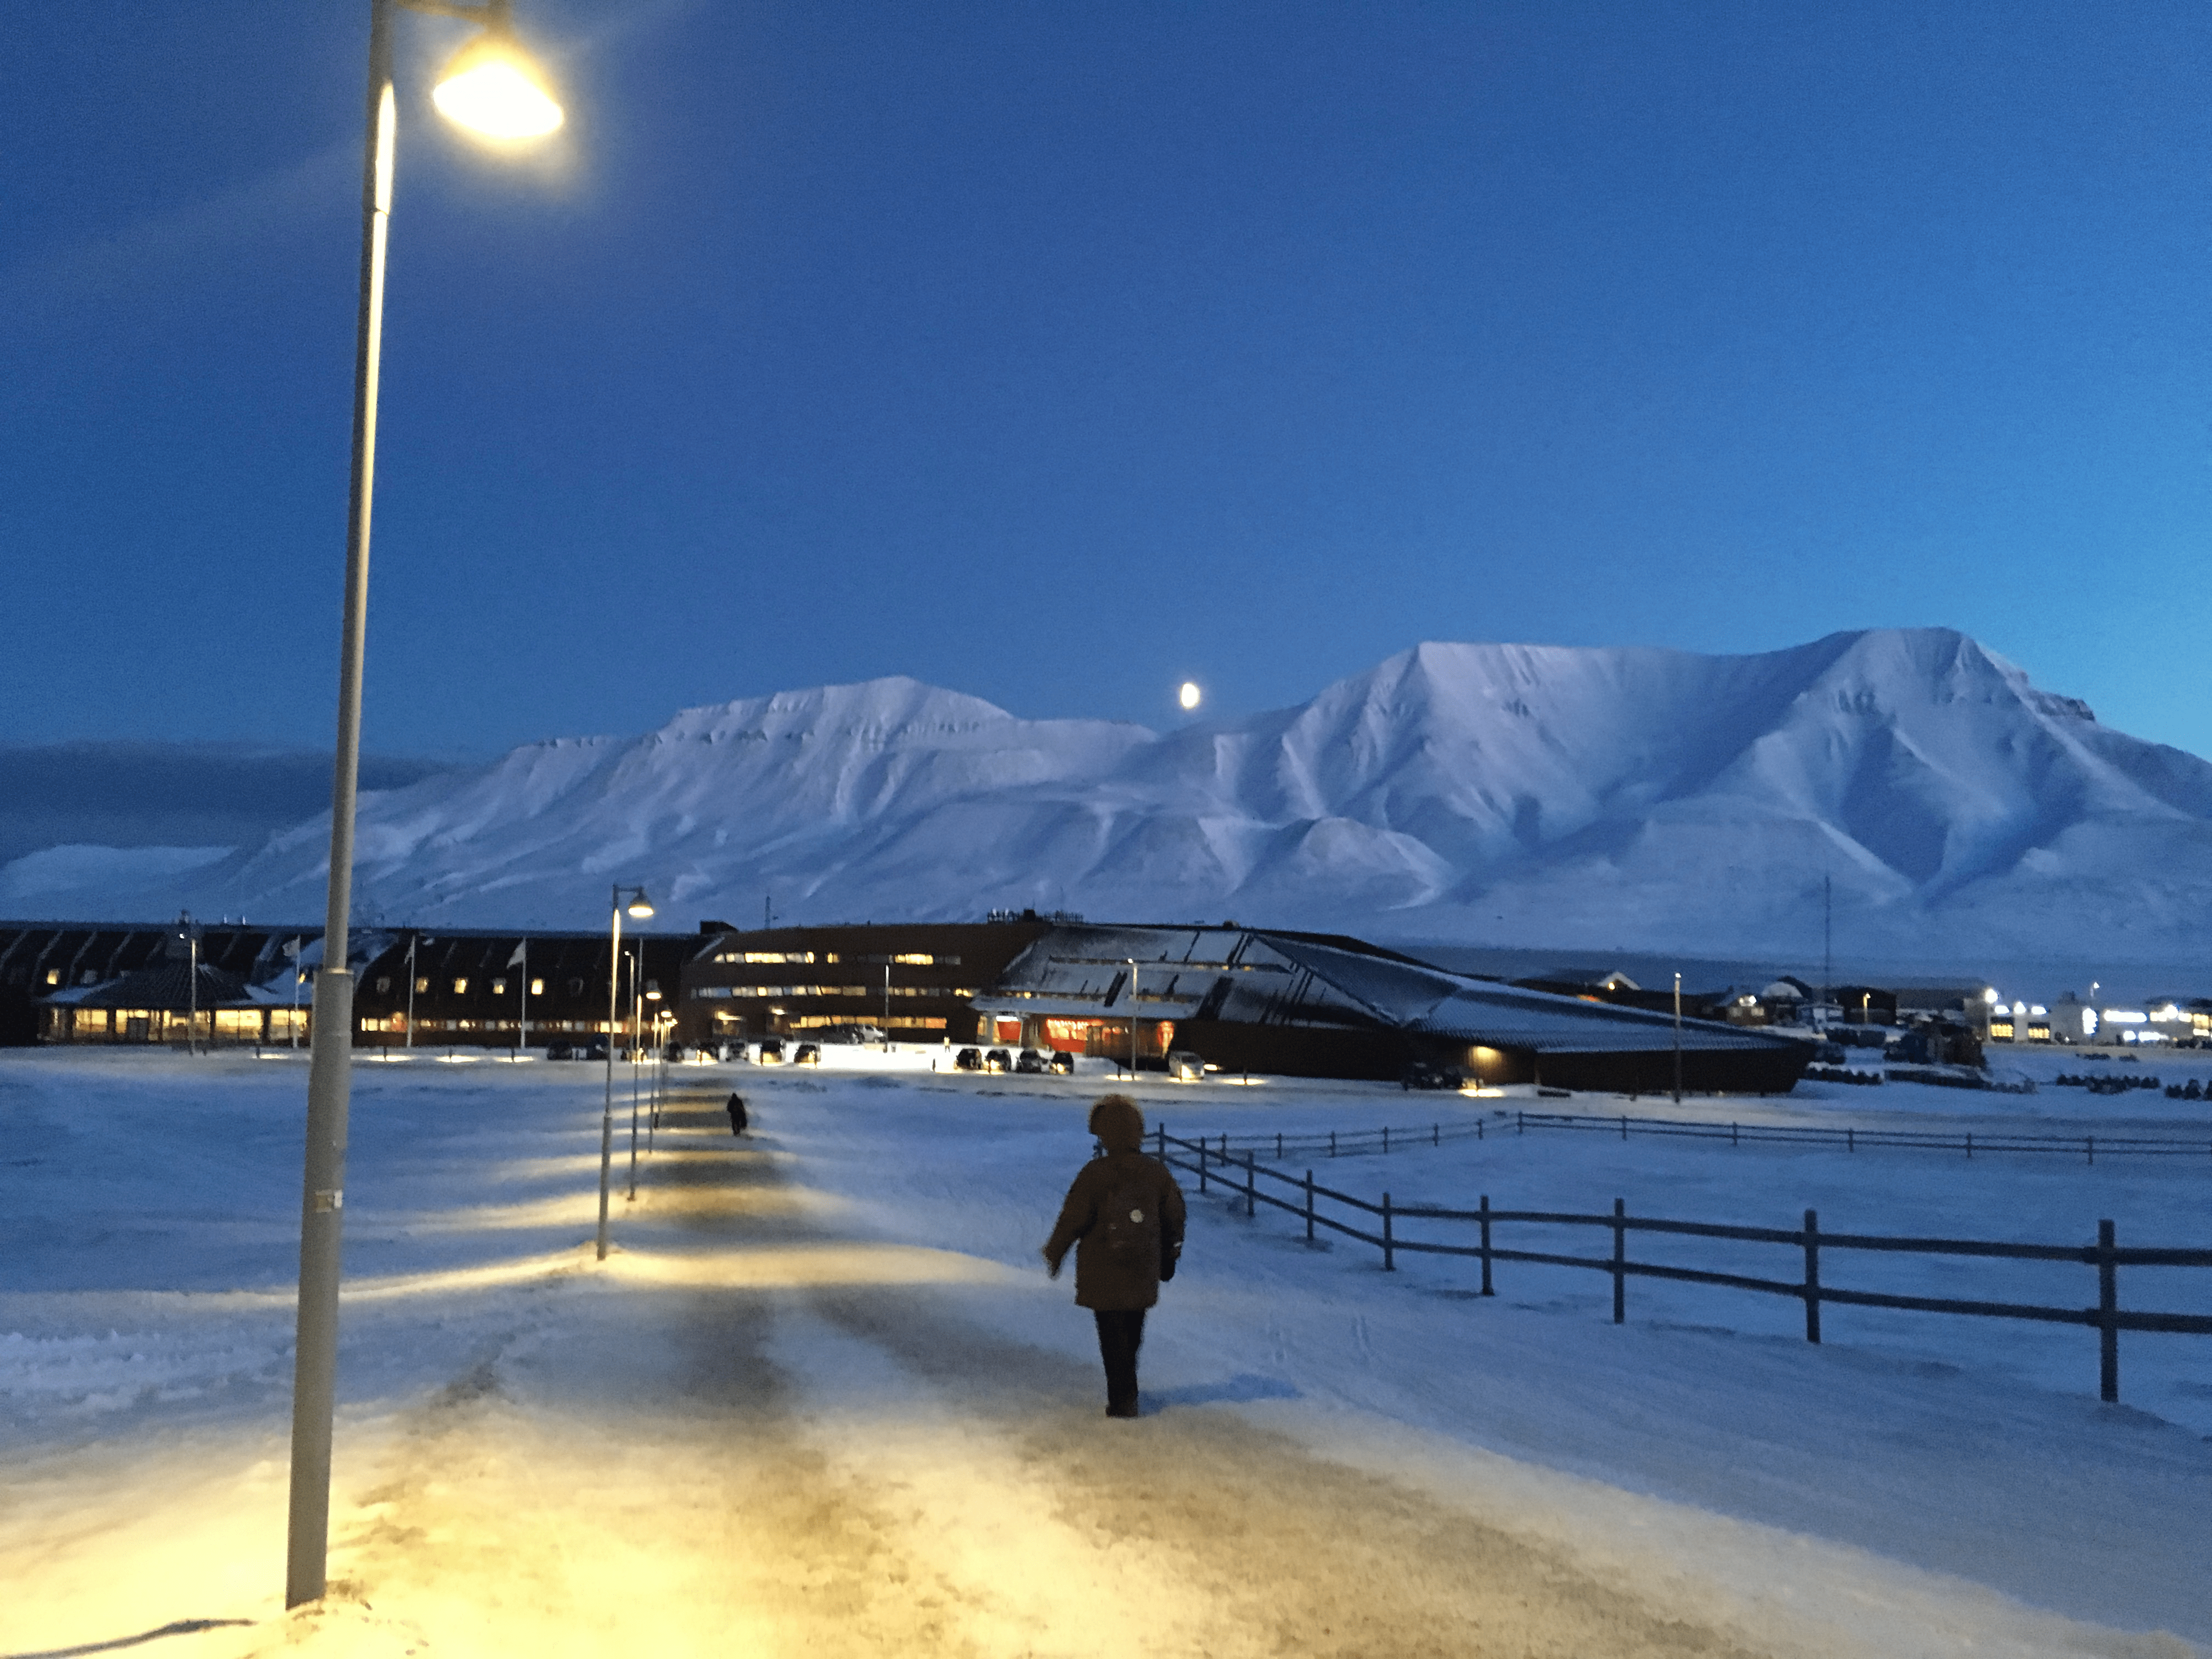 Student walking on dimly-lit path in snow with snowy mountains in background